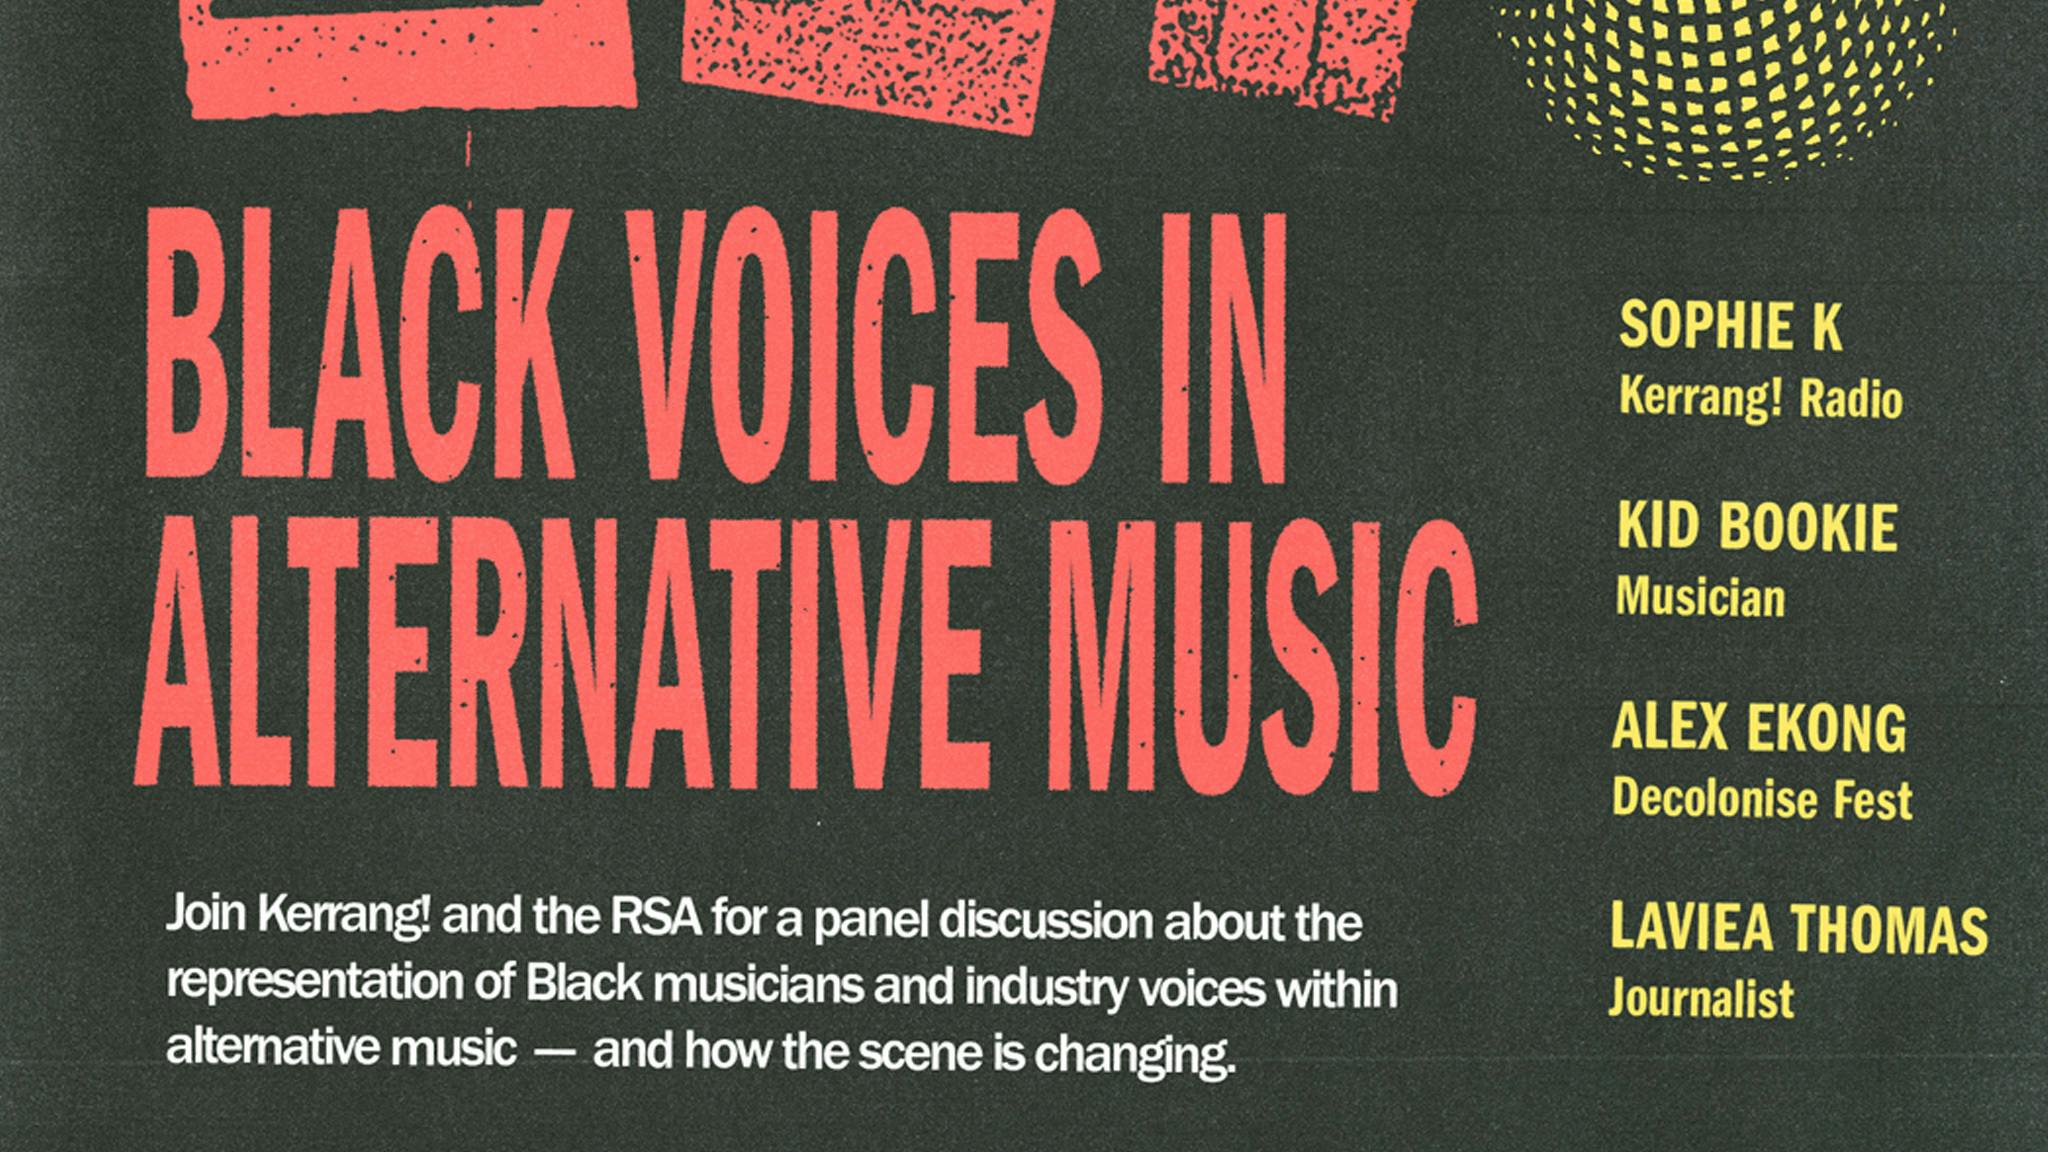 Come to a free RSA panel in London about Black voices in alternative music